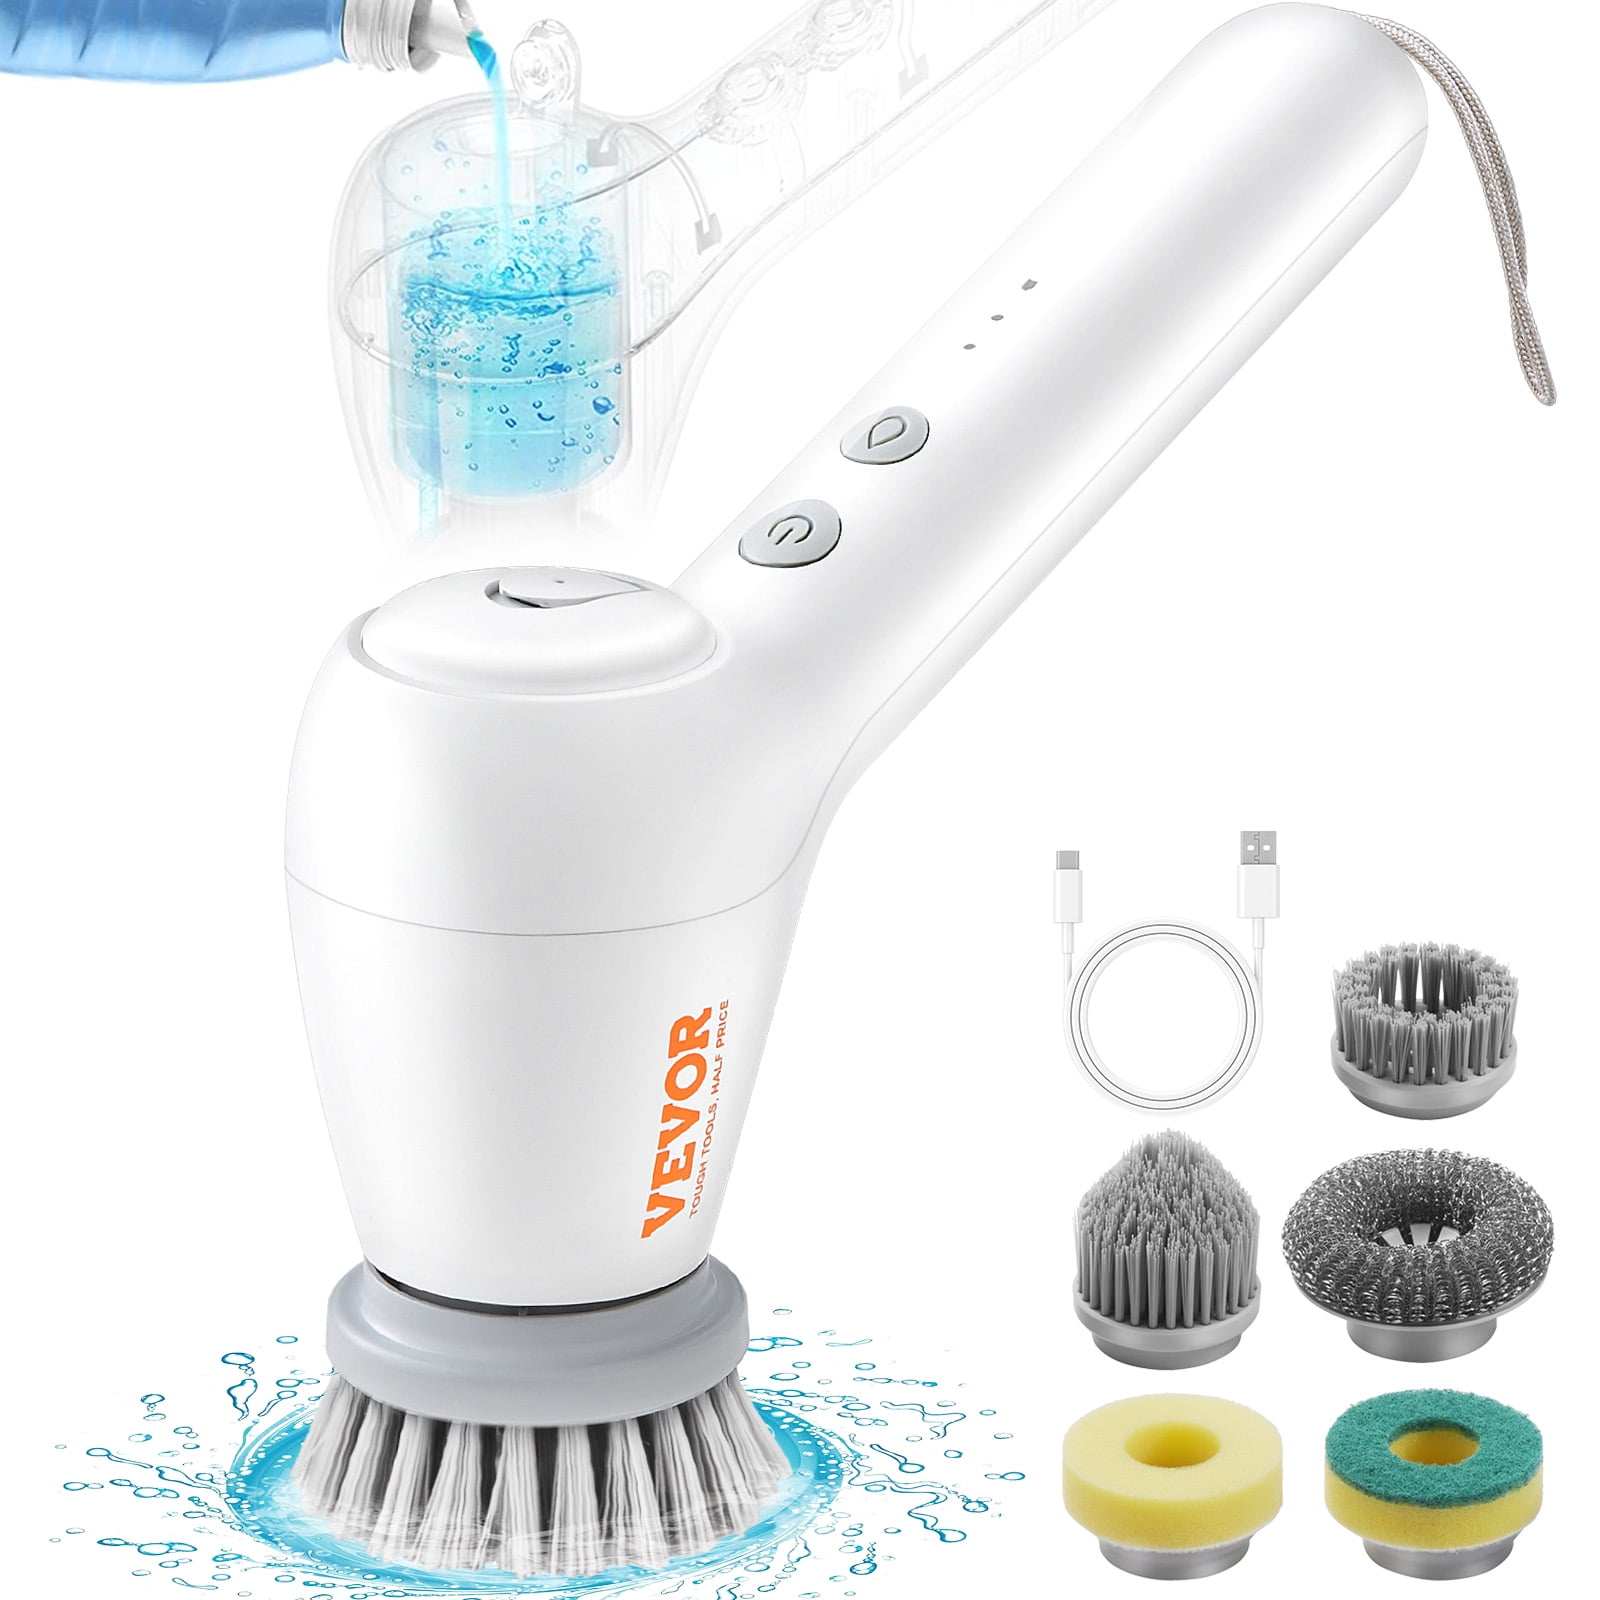 Home Kitchen Electric Cleaning Brush - GDHH115 - IdeaStage Promotional  Products